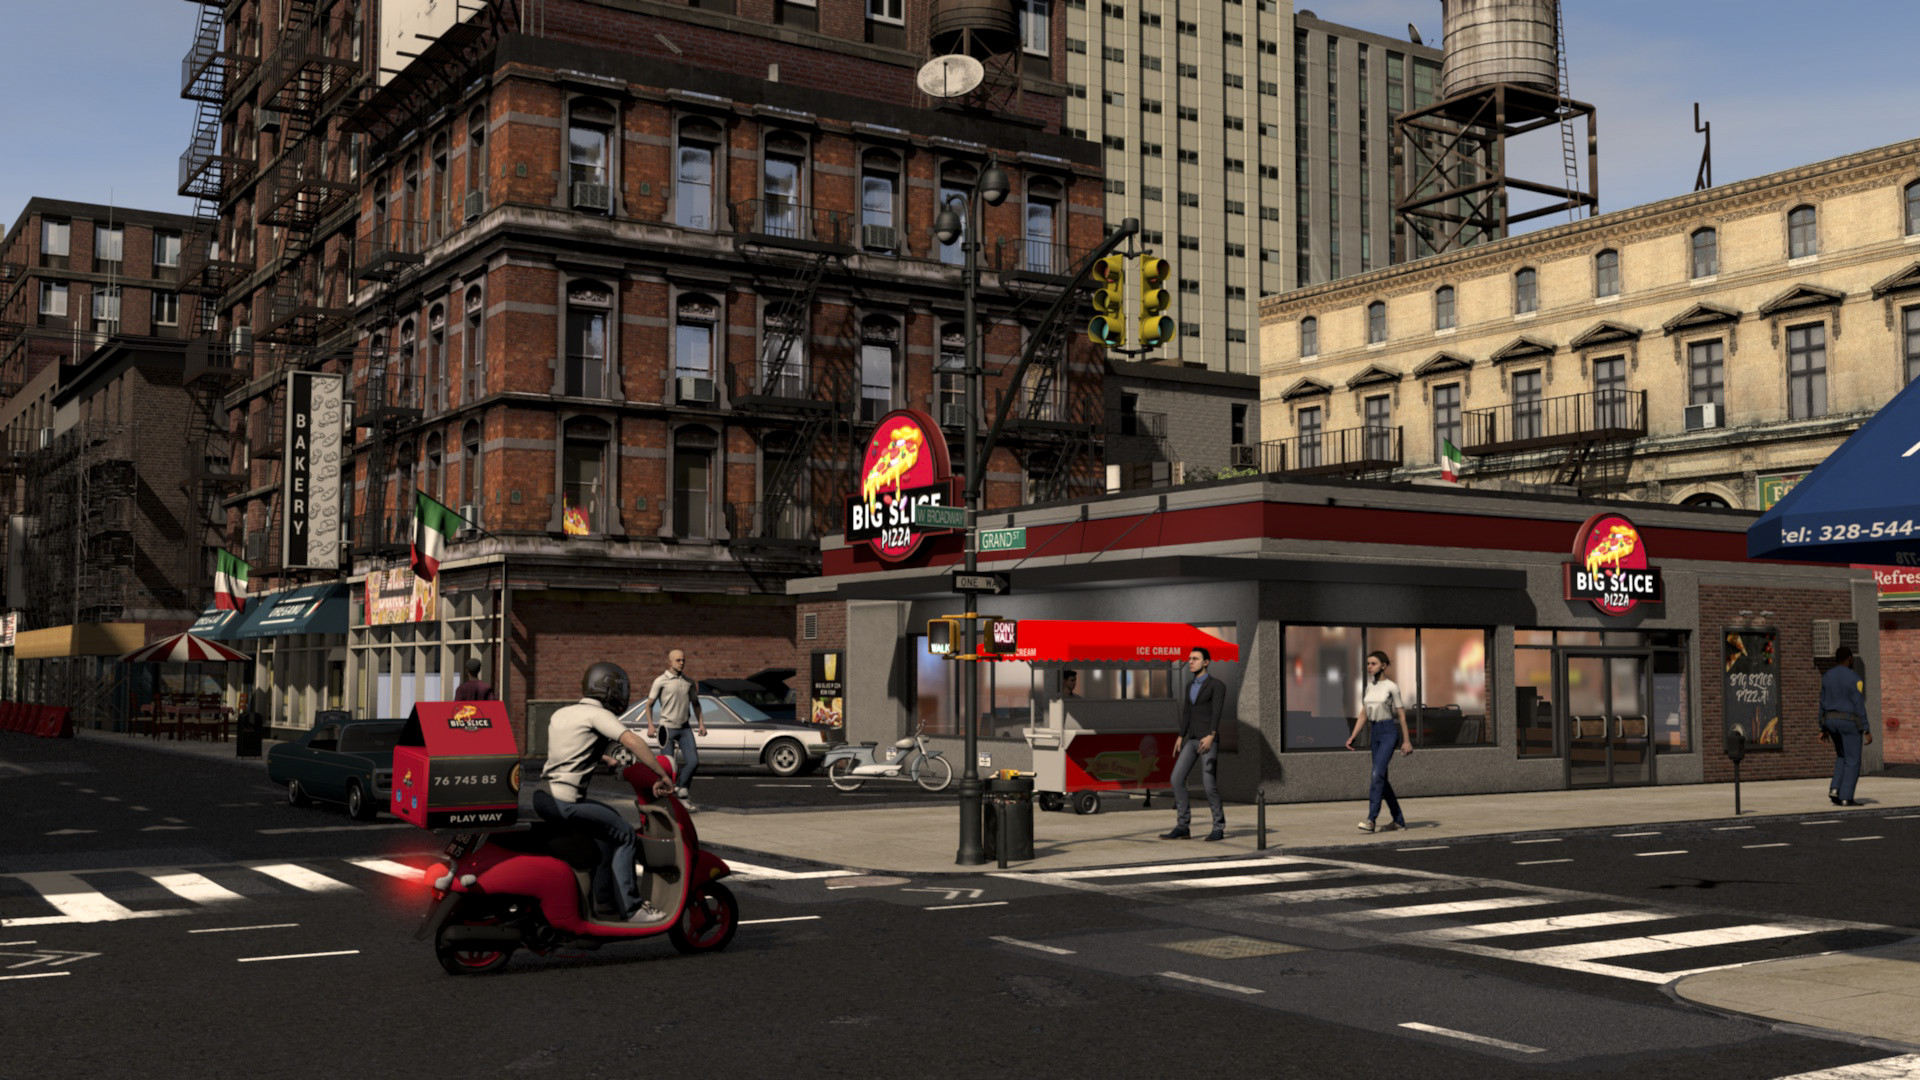 Manage A Pizza Shop In The Middle OF A Busy City In Pizza Simulator, Try And Create A Pizza Empire